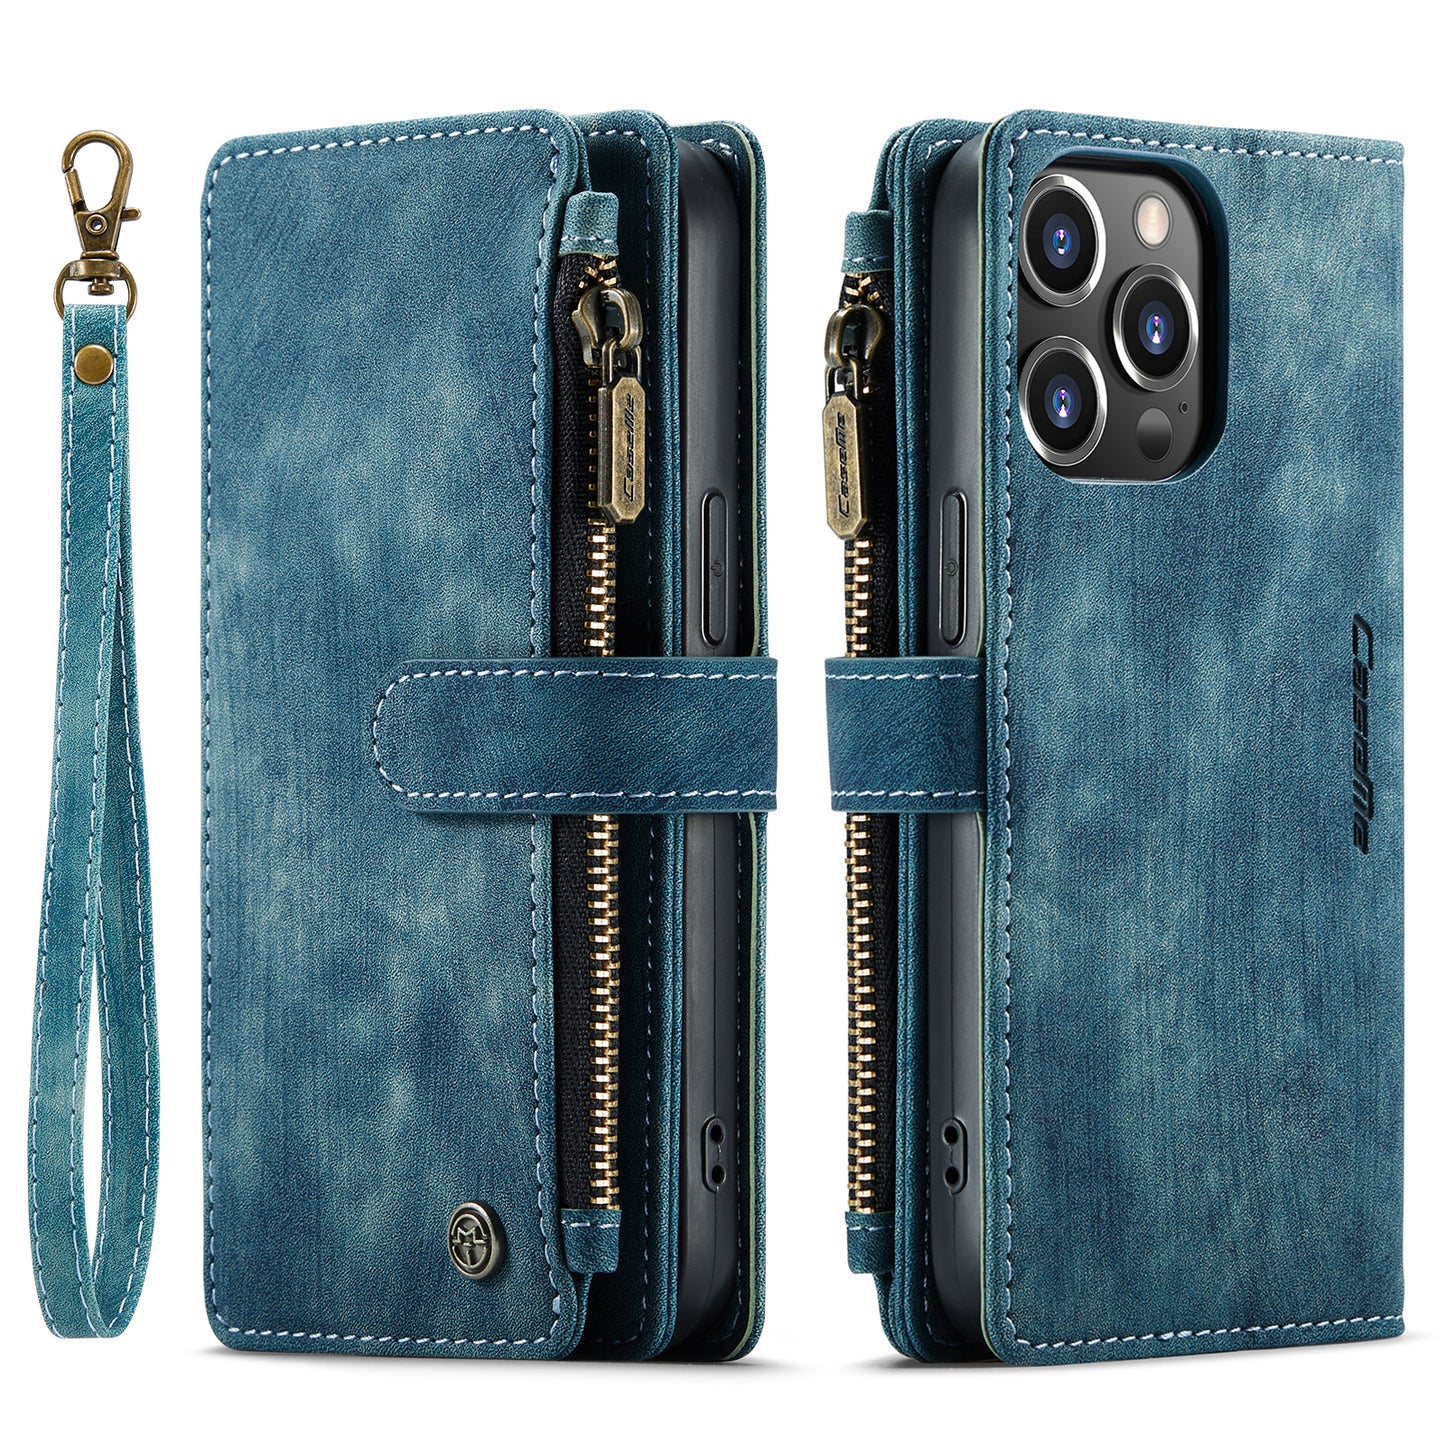 Multi-card Zipper iPhone 13 Pro Leather Case Double Fold Stand with Hand Strap